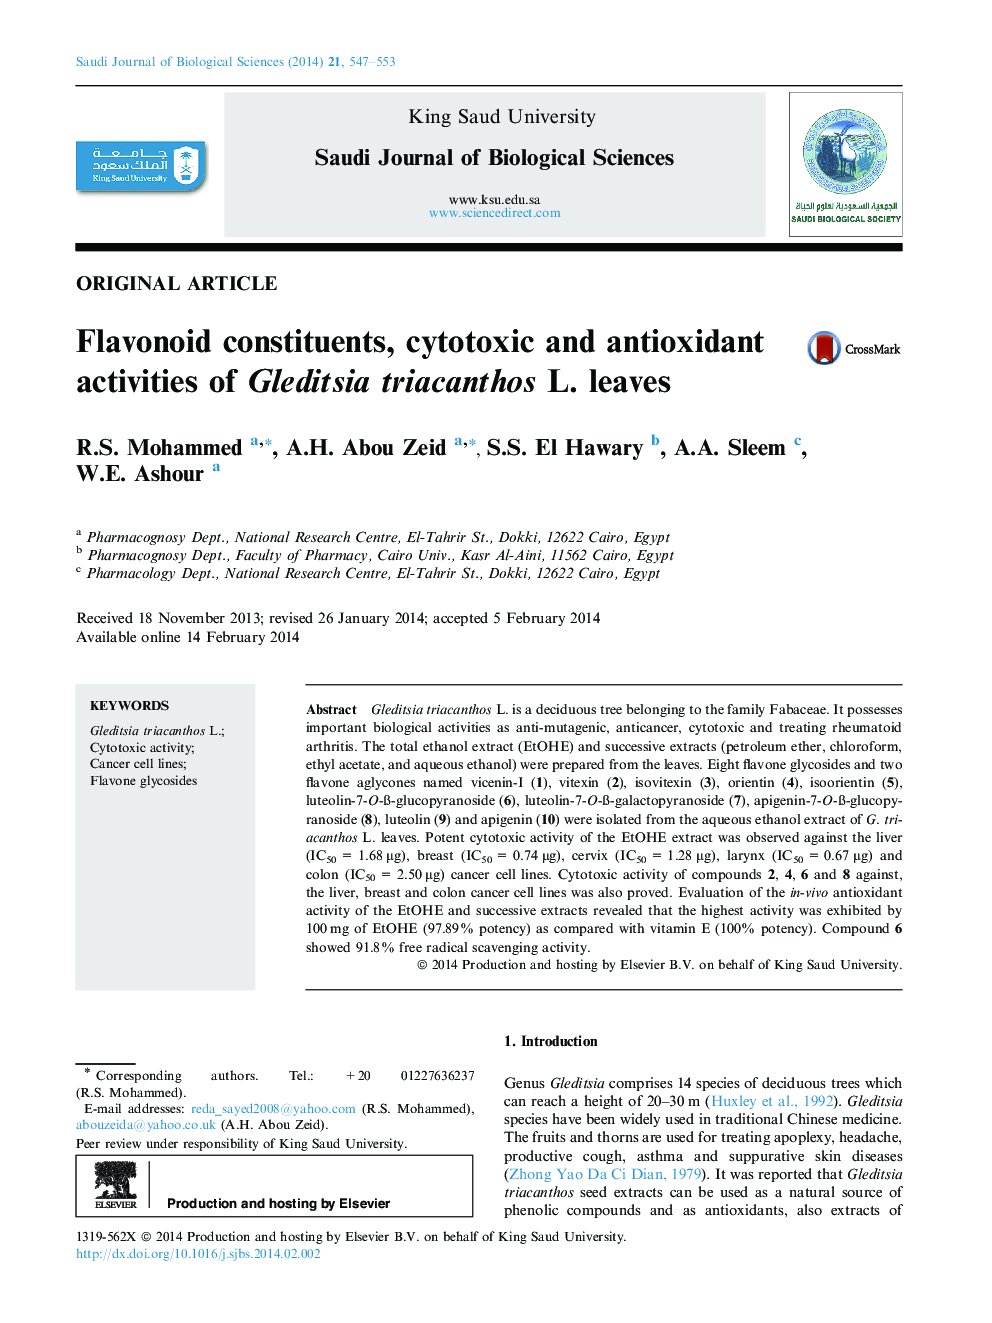 Flavonoid constituents, cytotoxic and antioxidant activities of Gleditsia triacanthos L. leaves 